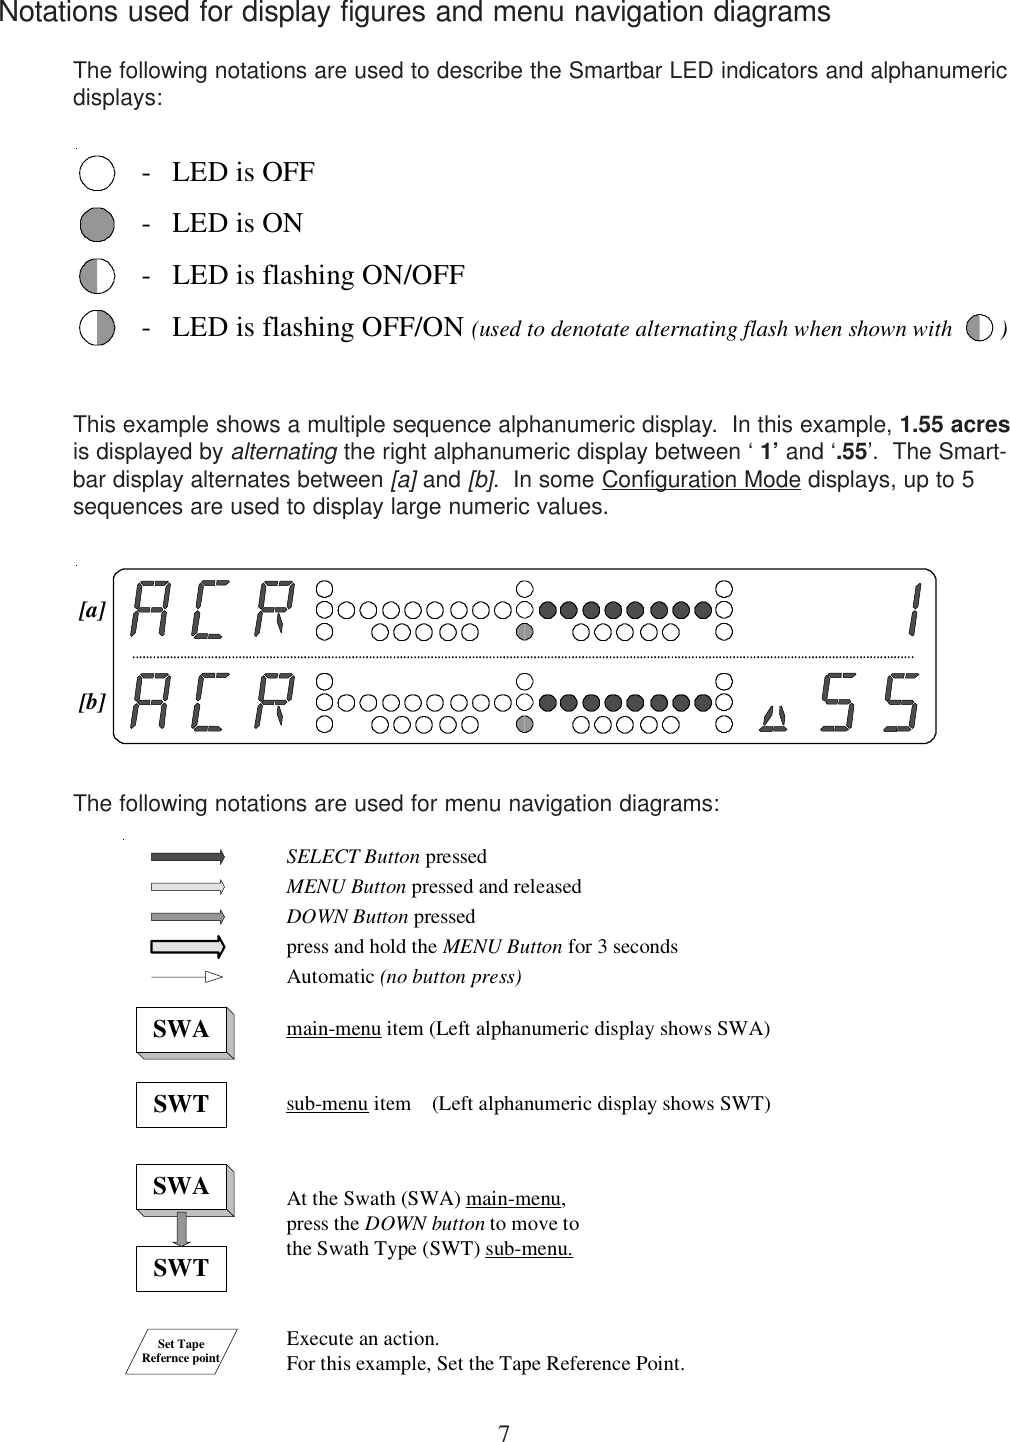 7Notations used for display figures and menu navigation diagramsThe following notations are used to describe the Smartbar LED indicators and alphanumericdisplays:This example shows a multiple sequence alphanumeric display.  In this example, 1.55 acresis displayed by alternating the right alphanumeric display between ‘ 1’ and ‘.55’.  The Smart-bar display alternates between [a] and [b].  In some Configuration Mode displays, up to 5sequences are used to display large numeric values.The following notations are used for menu navigation diagrams:SWASWTSWASWTmain-menu item (Left alphanumeric display shows SWA)sub-menu item    (Left alphanumeric display shows SWT)At the Swath (SWA) main-menu,press the DOWN button to move tothe Swath Type (SWT) sub-menu.Execute an action.For this example, Set the Tape Reference Point.Set TapeRefernce pointMENU Button pressed and releasedDOWN Button pressedSELECT Button pressedpress and hold the MENU Button for 3 secondsAutomatic (no button press)[a][b]-   LED is OFF-   LED is ON-   LED is flashing ON/OFF-   LED is flashing OFF/ON (used to denotate alternating flash when shown with        )